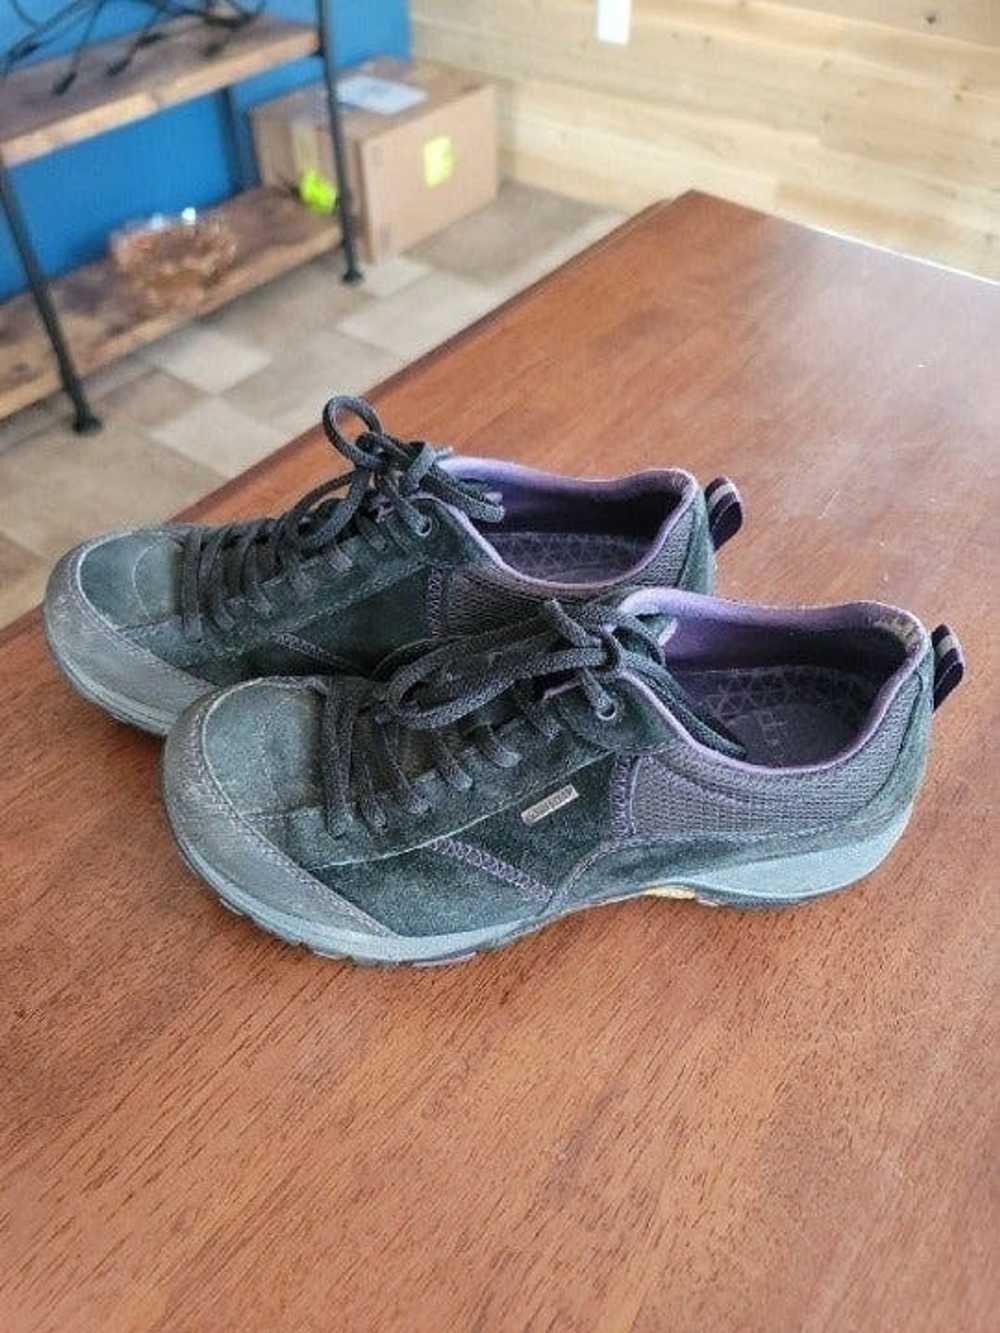 Other Women's Dansko Hiking Shoes Size 7.5-8 - image 6